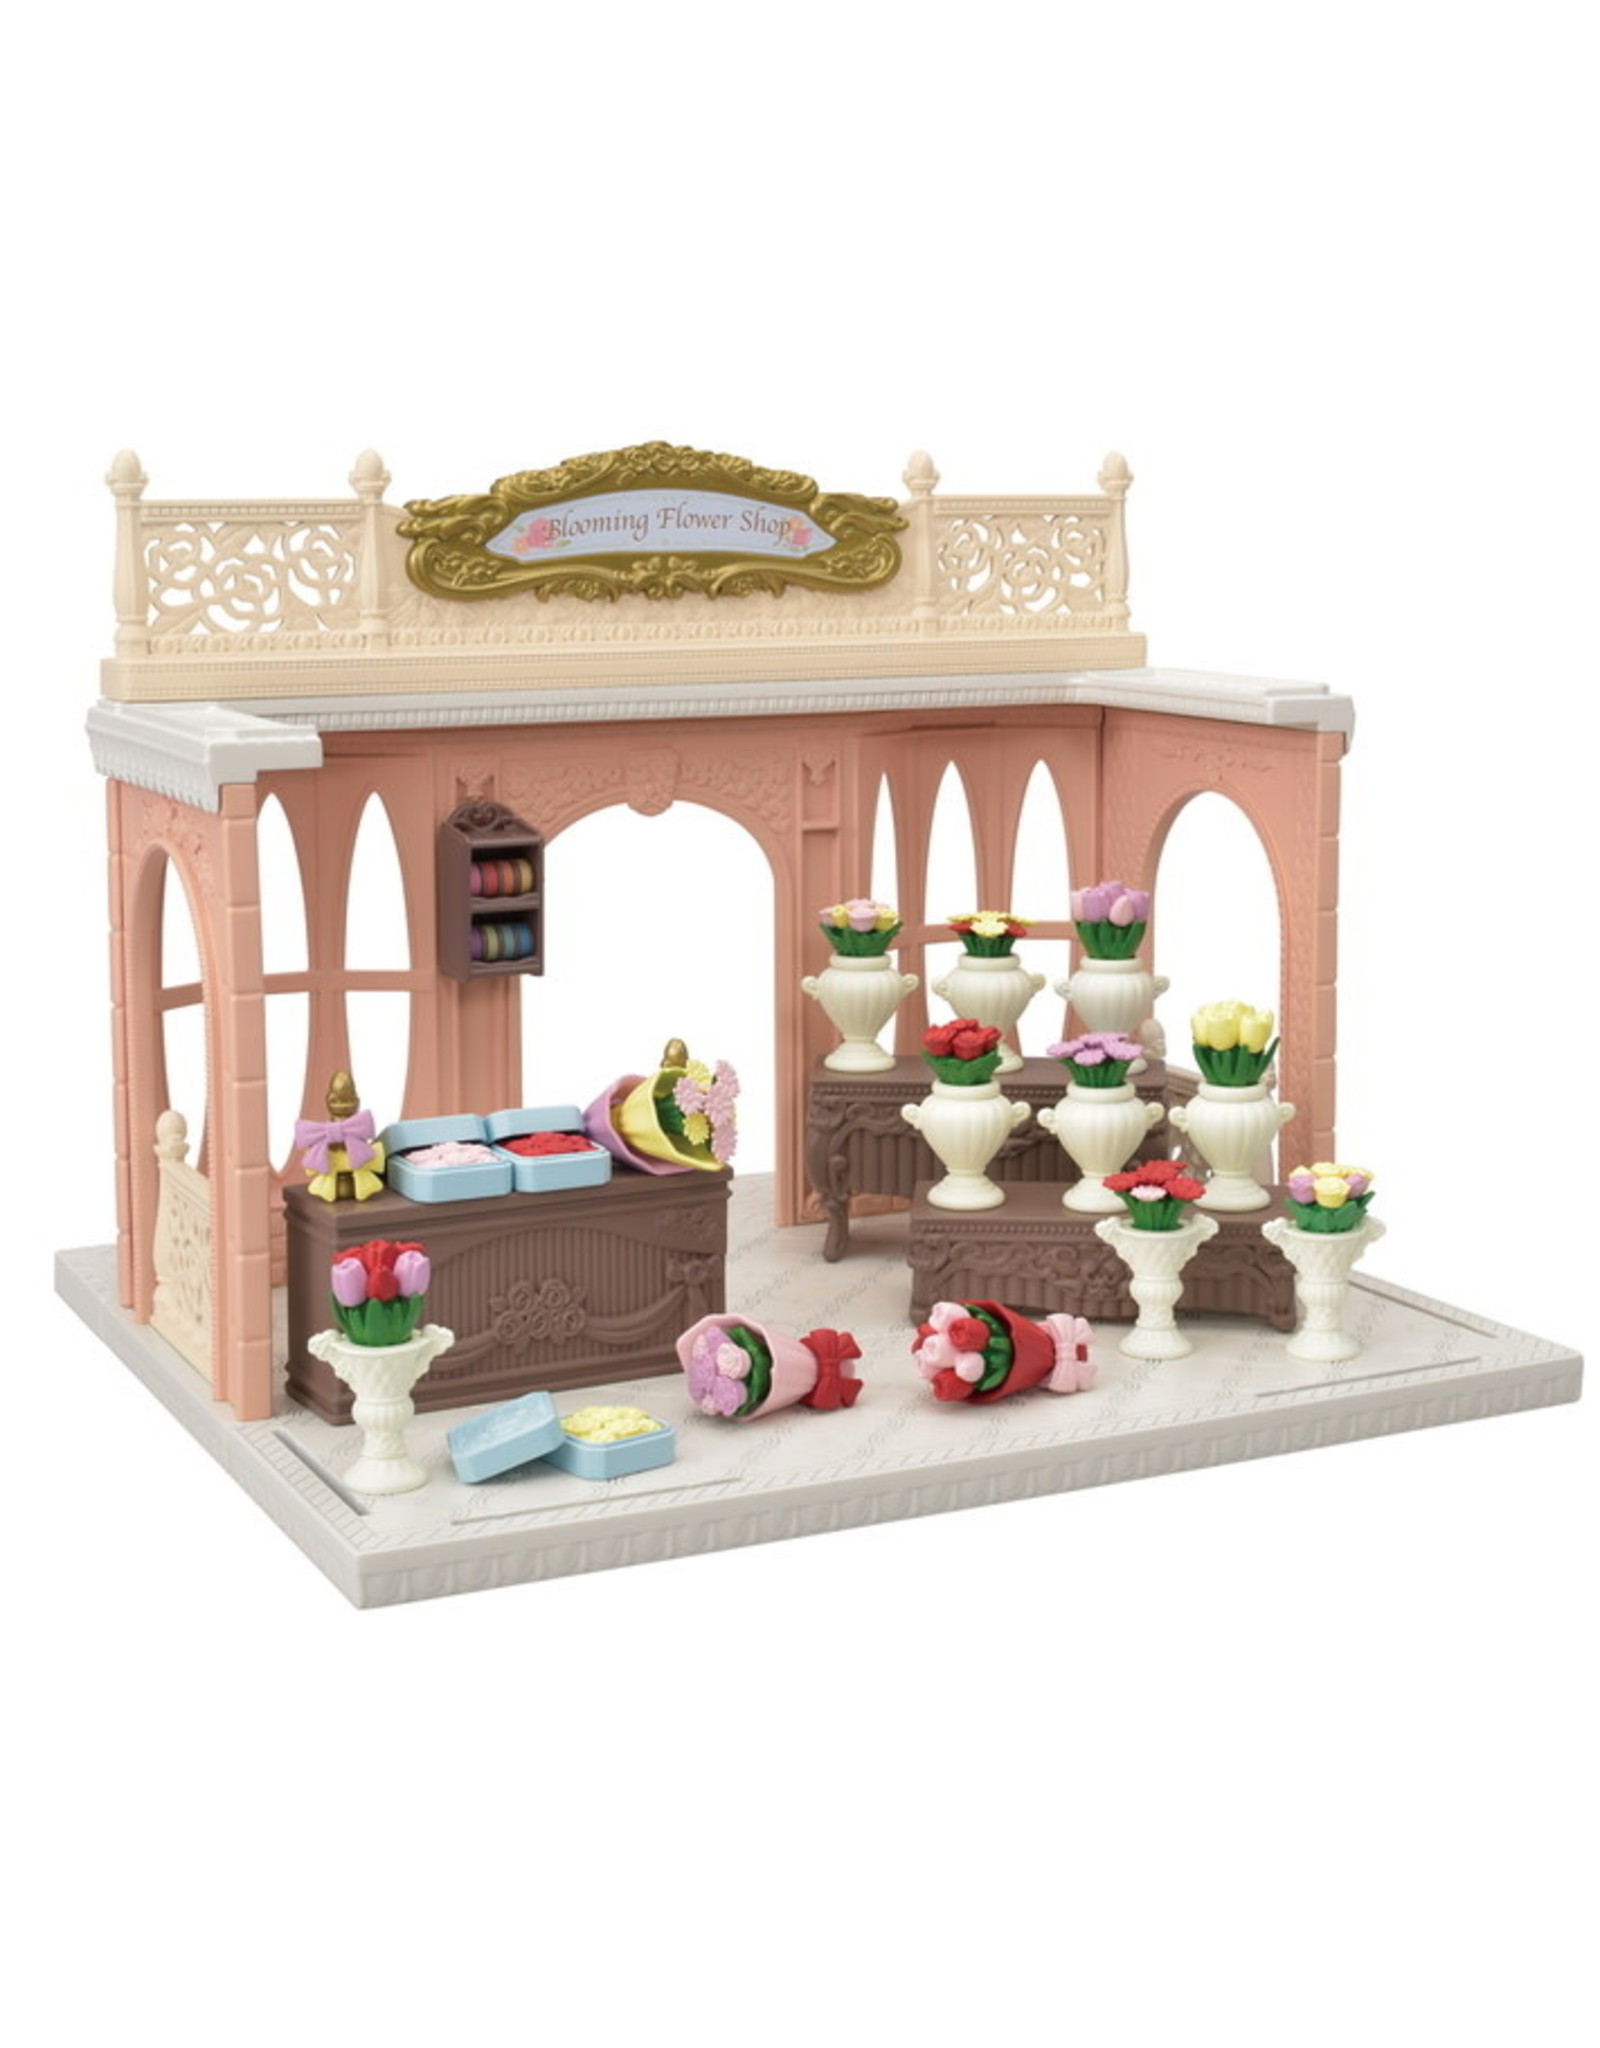 calico critters dollhouse